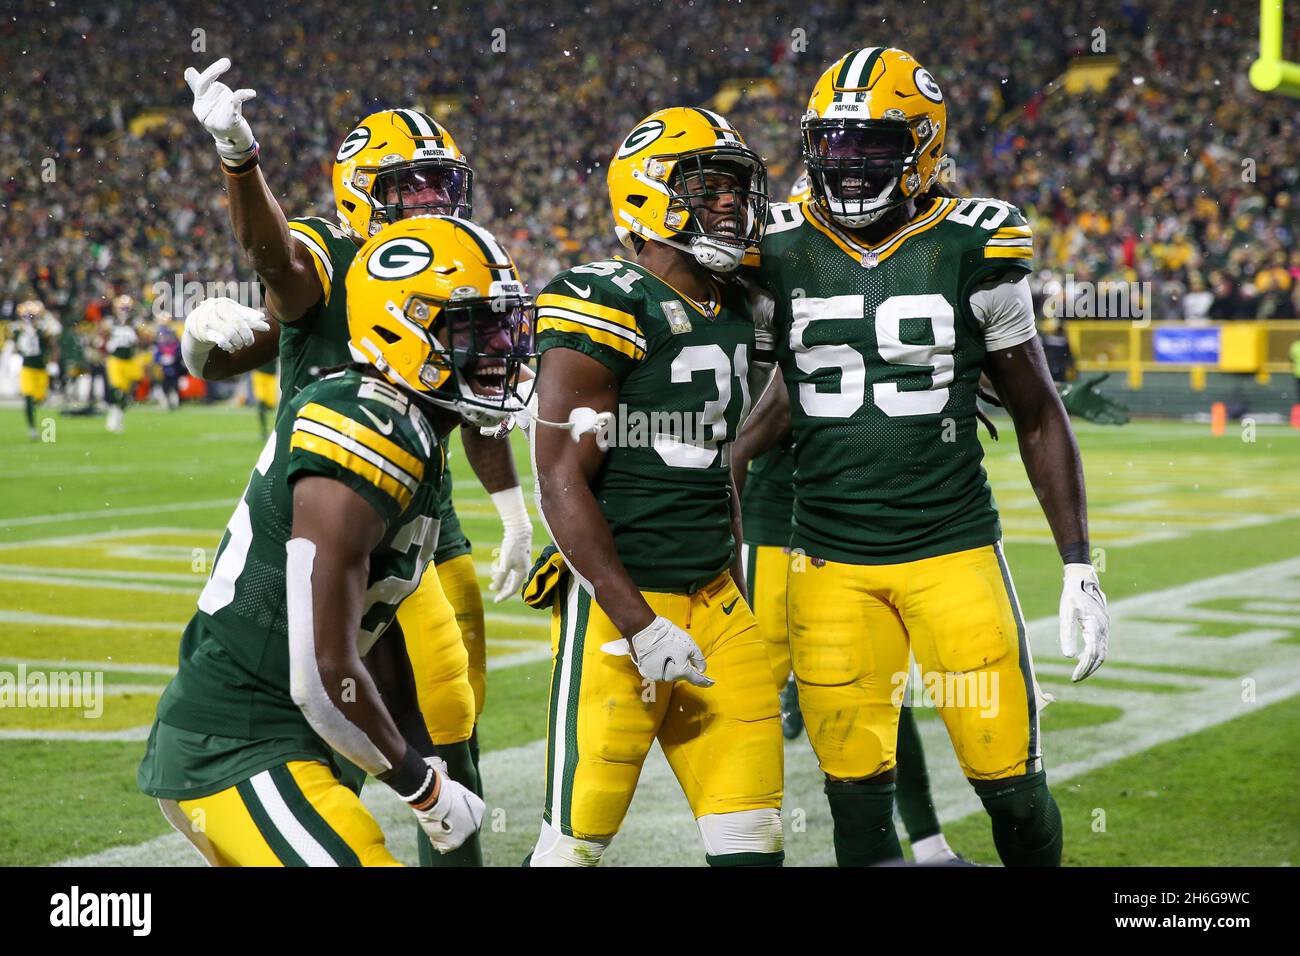 Green Bay, Wisconsin, USA. 14th Nov, 2021. Green Bay Packers safety Adrian Amos (31) celebrates his interception with inside linebacker De'Vondre Campbell (59), free safety Darnell Savage (26), and cornerback Eric Stokes (21) during the NFL football game between the Seattle Seahawks and the Green Bay Packers at Lambeau Field in Green Bay, Wisconsin. Darren Lee/CSM/Alamy Live News Stock Photo